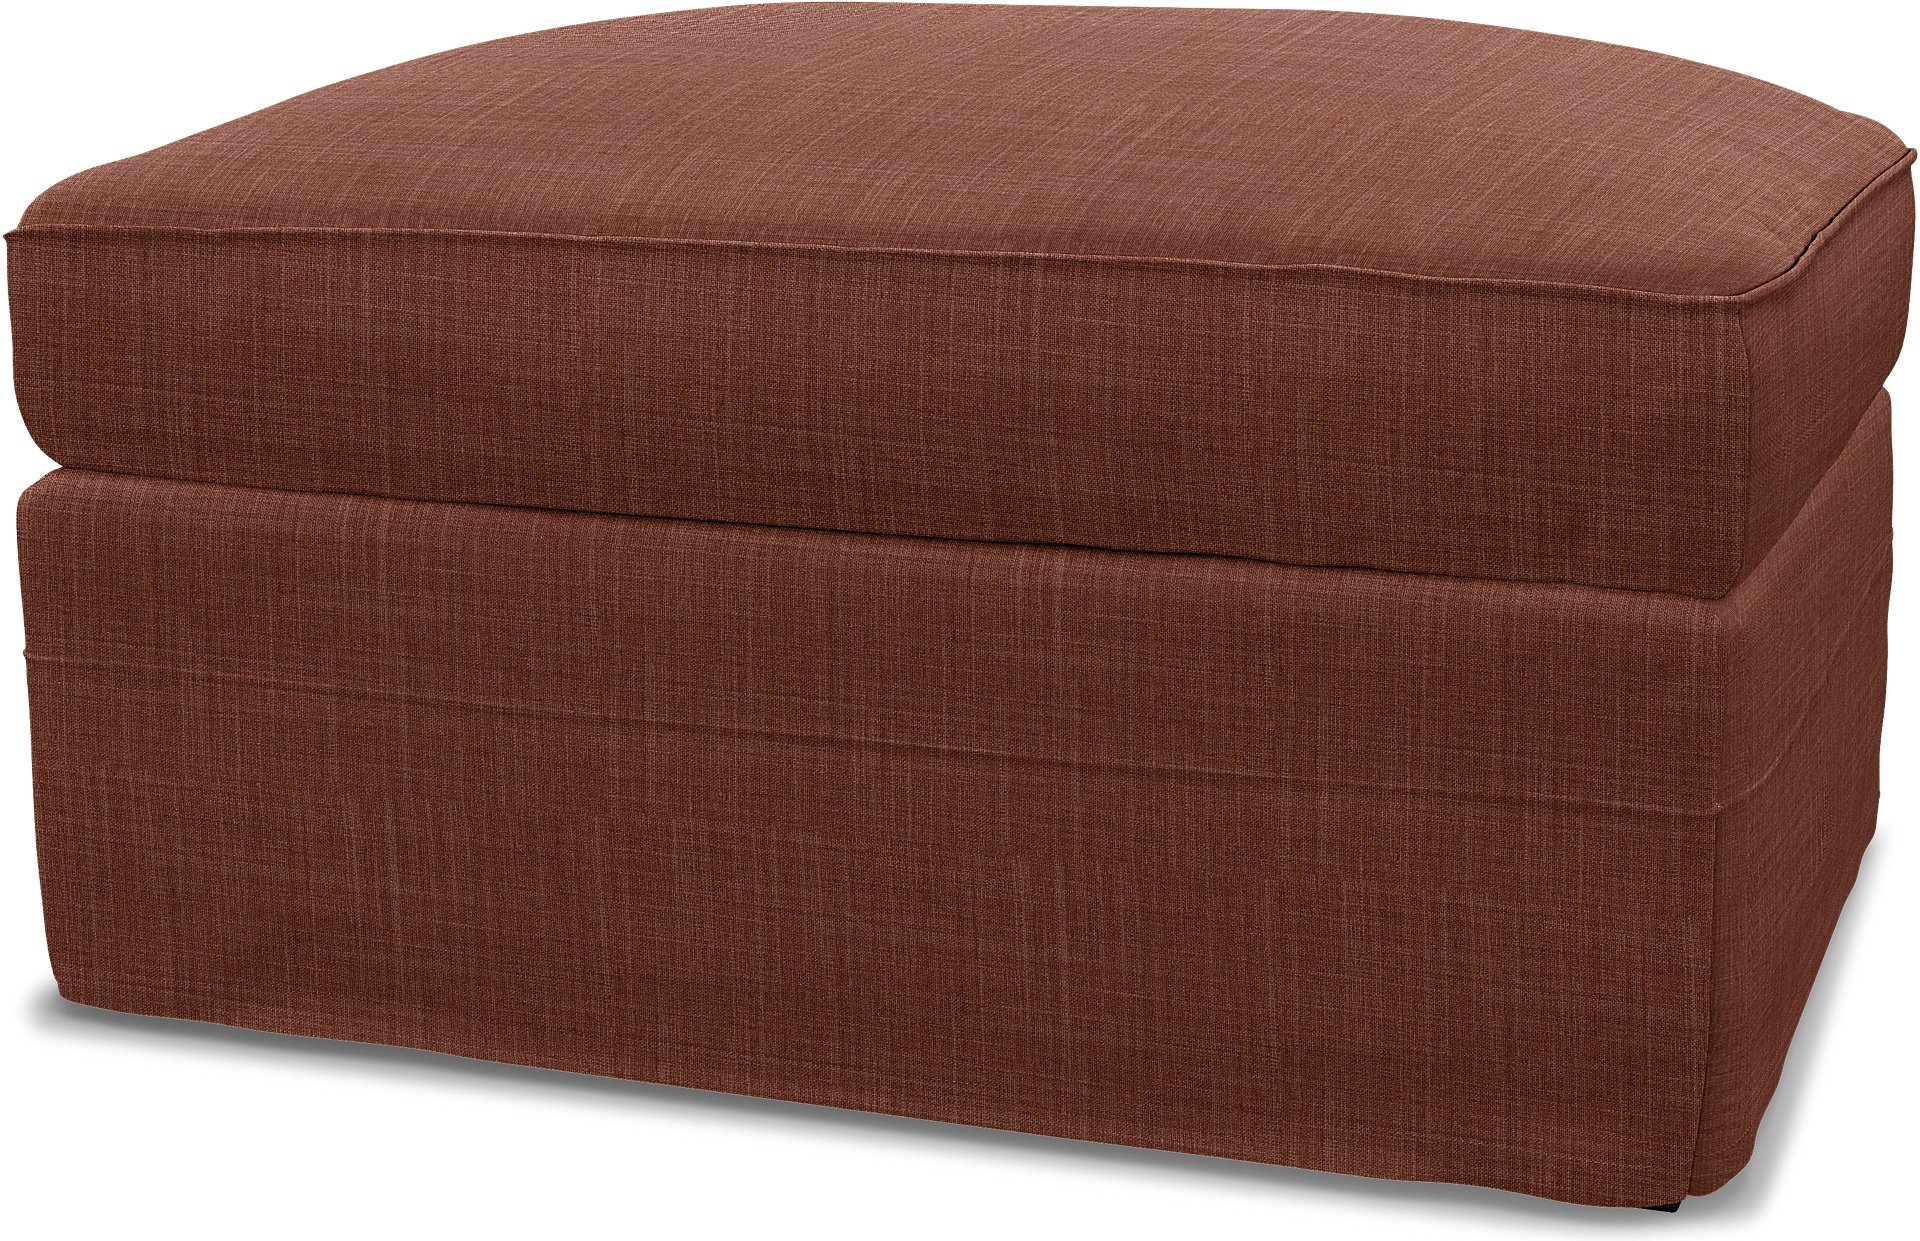 IKEA - Gronlid Footstool with Storage Cover, Rust, Boucle & Texture - Bemz